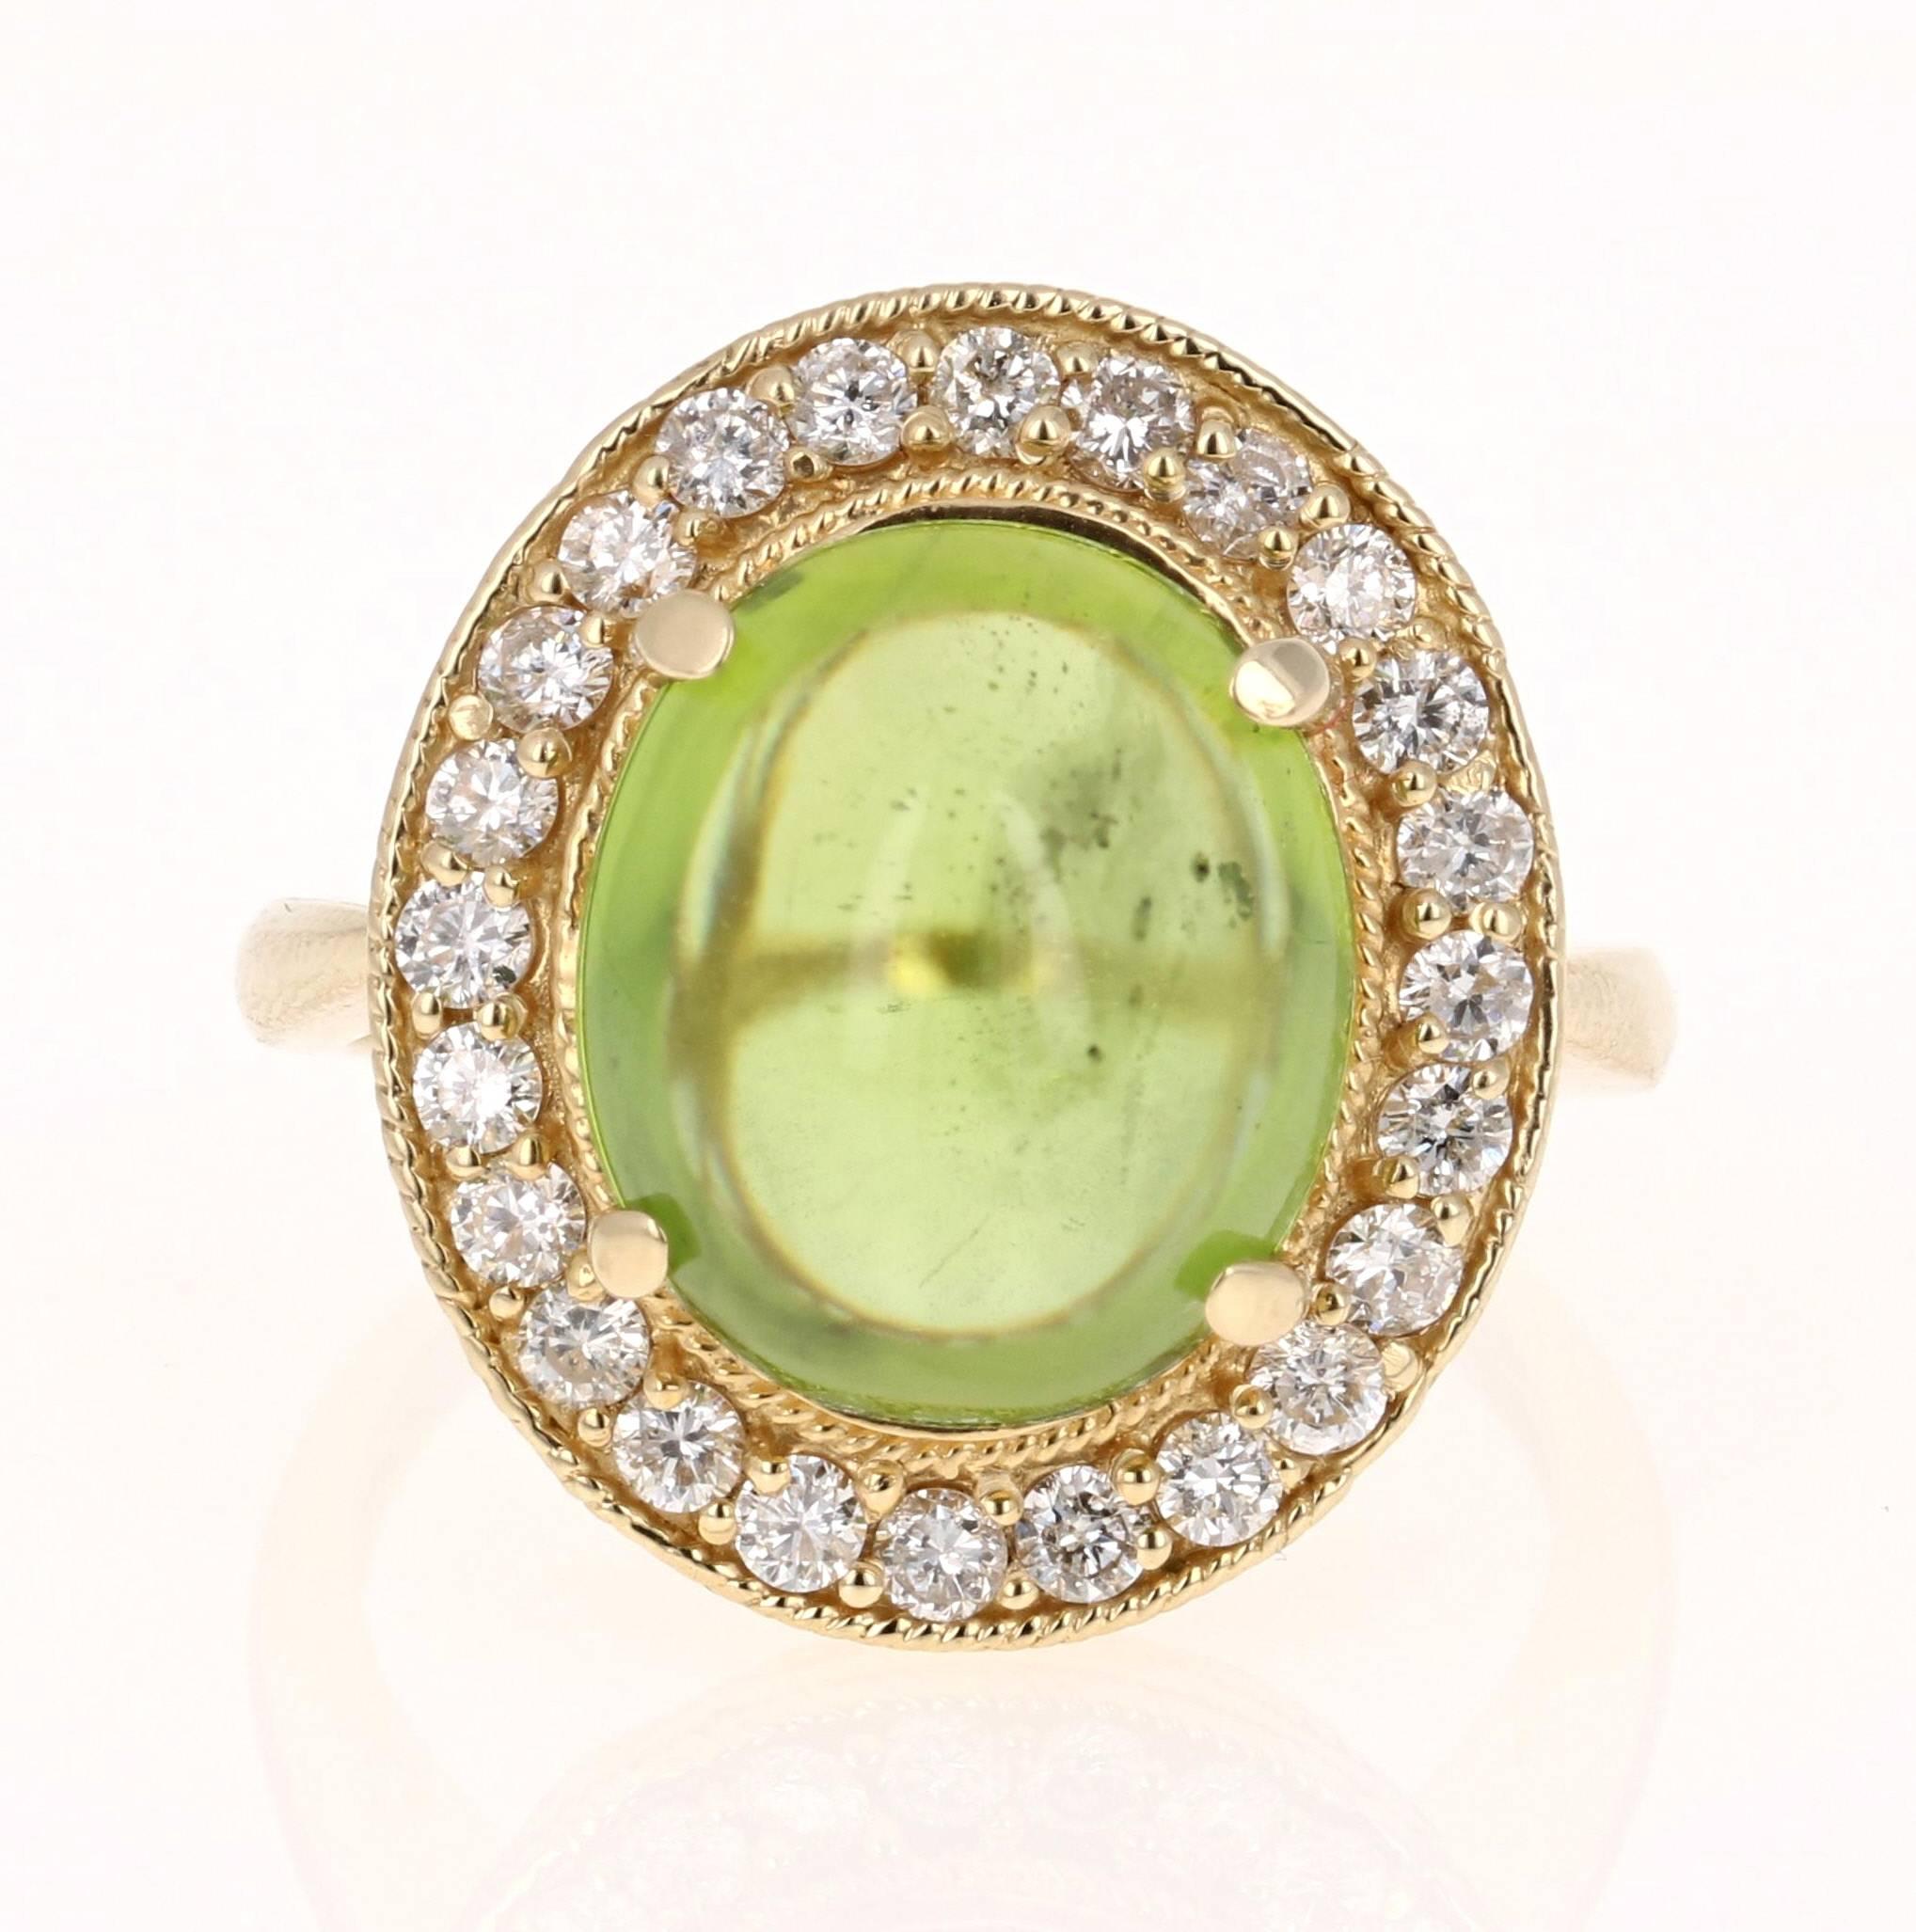 This beautiful ring has a large Oval Cabochon Cut Peridot in the center that weighs 7.11 carats. The ring is surrounded by a gorgeous halo of 24 Round Cut Diamonds that weigh 0.70 carats. The total carat weight of the ring is 7.81 carats. The